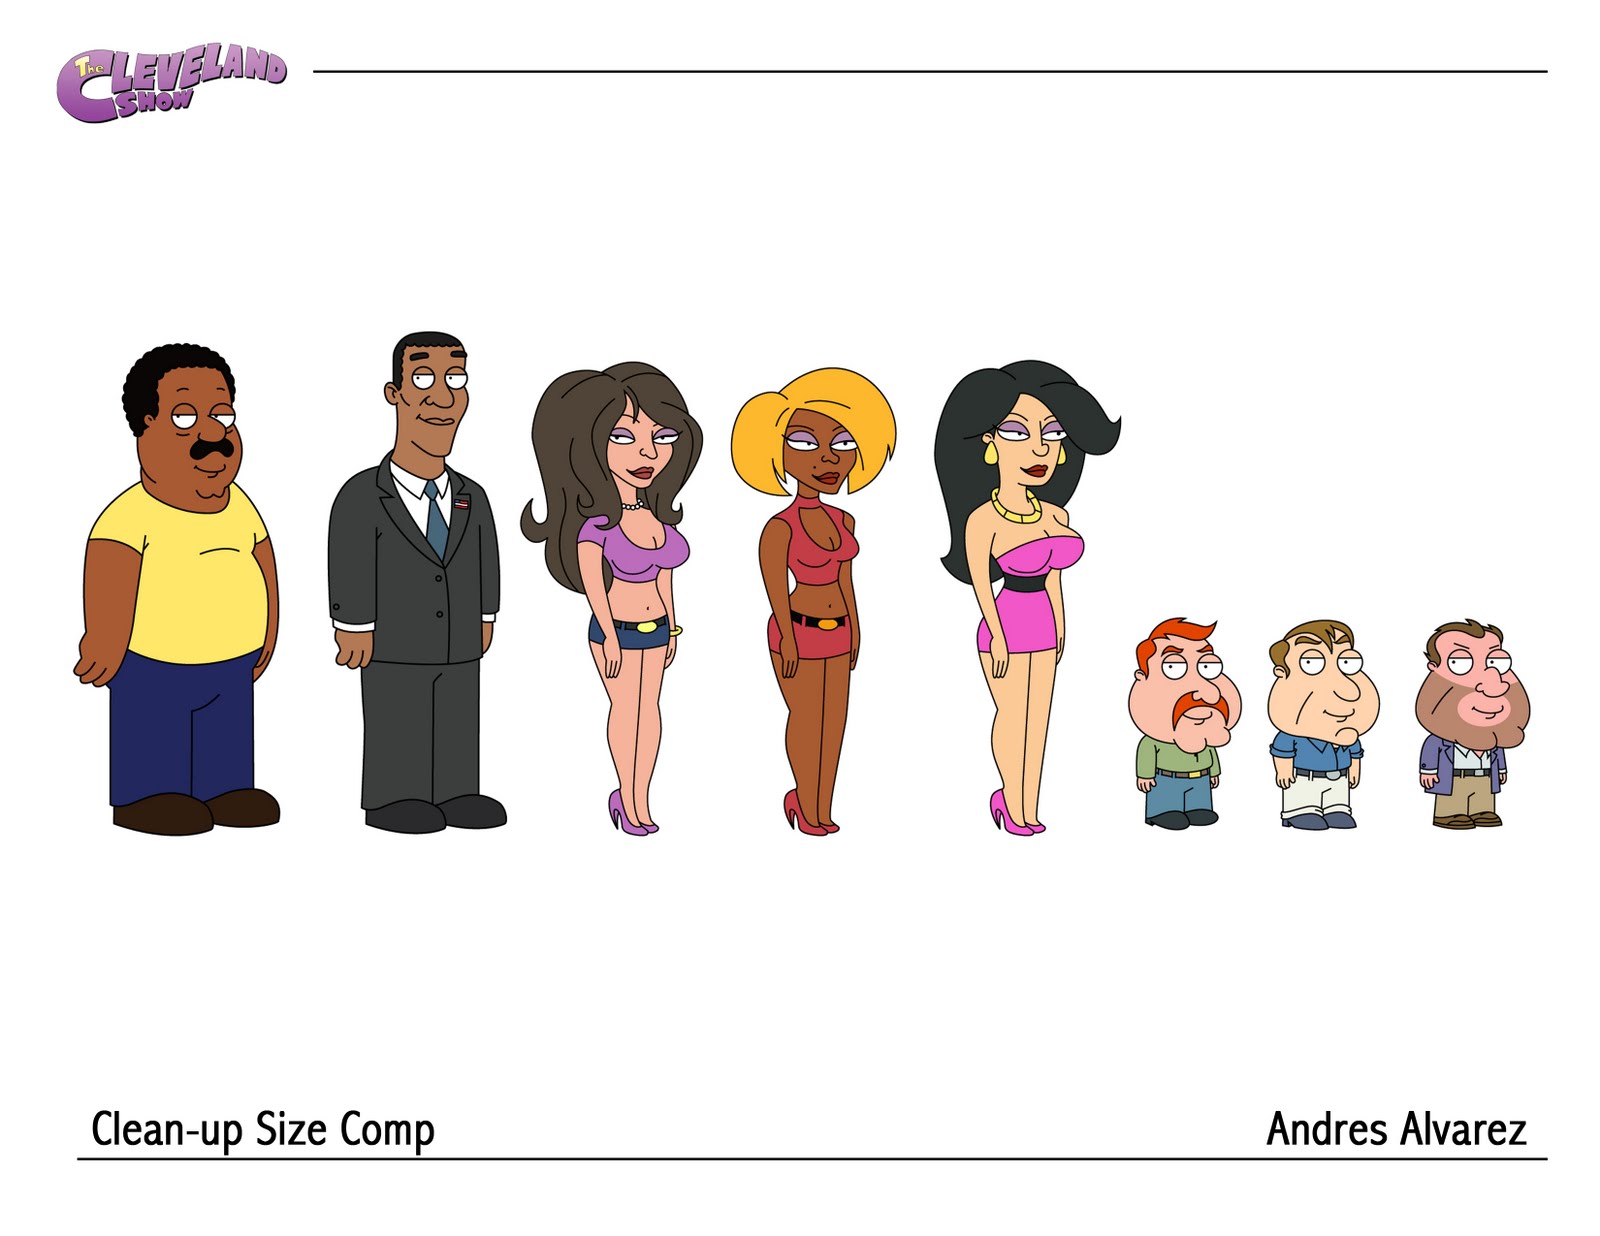 CLEVELAND SHOW LITTLE CONCEPT by ADC2378 on DeviantArt